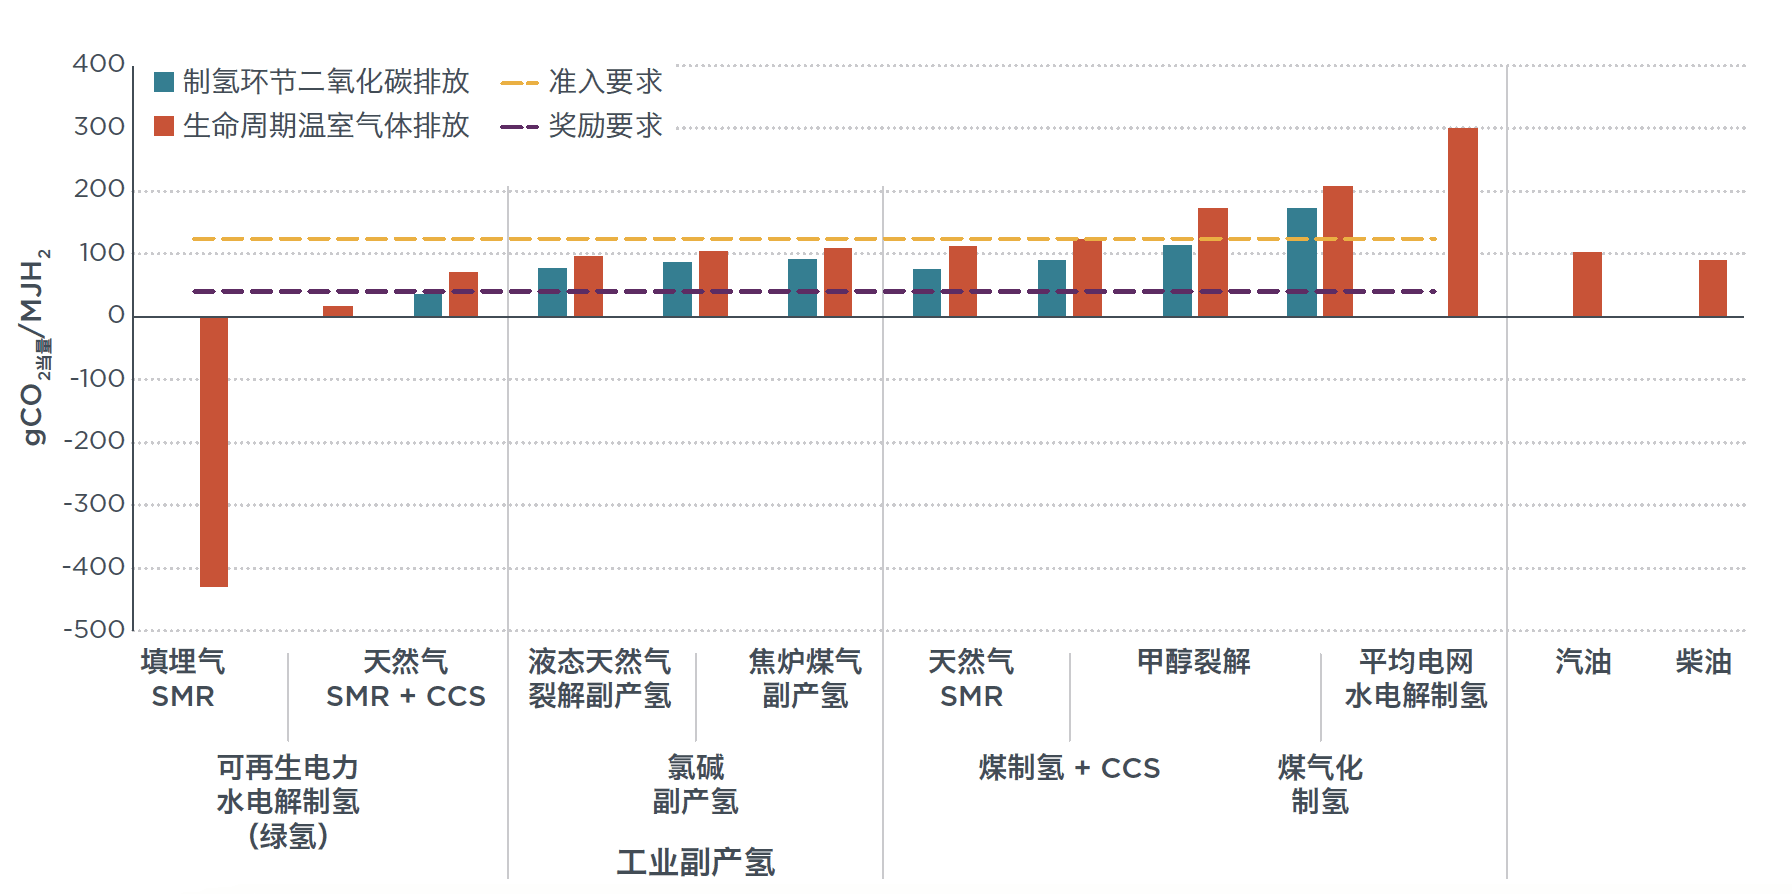 bar graph showing carbon intensity of eleven hydrogen production pathways in China